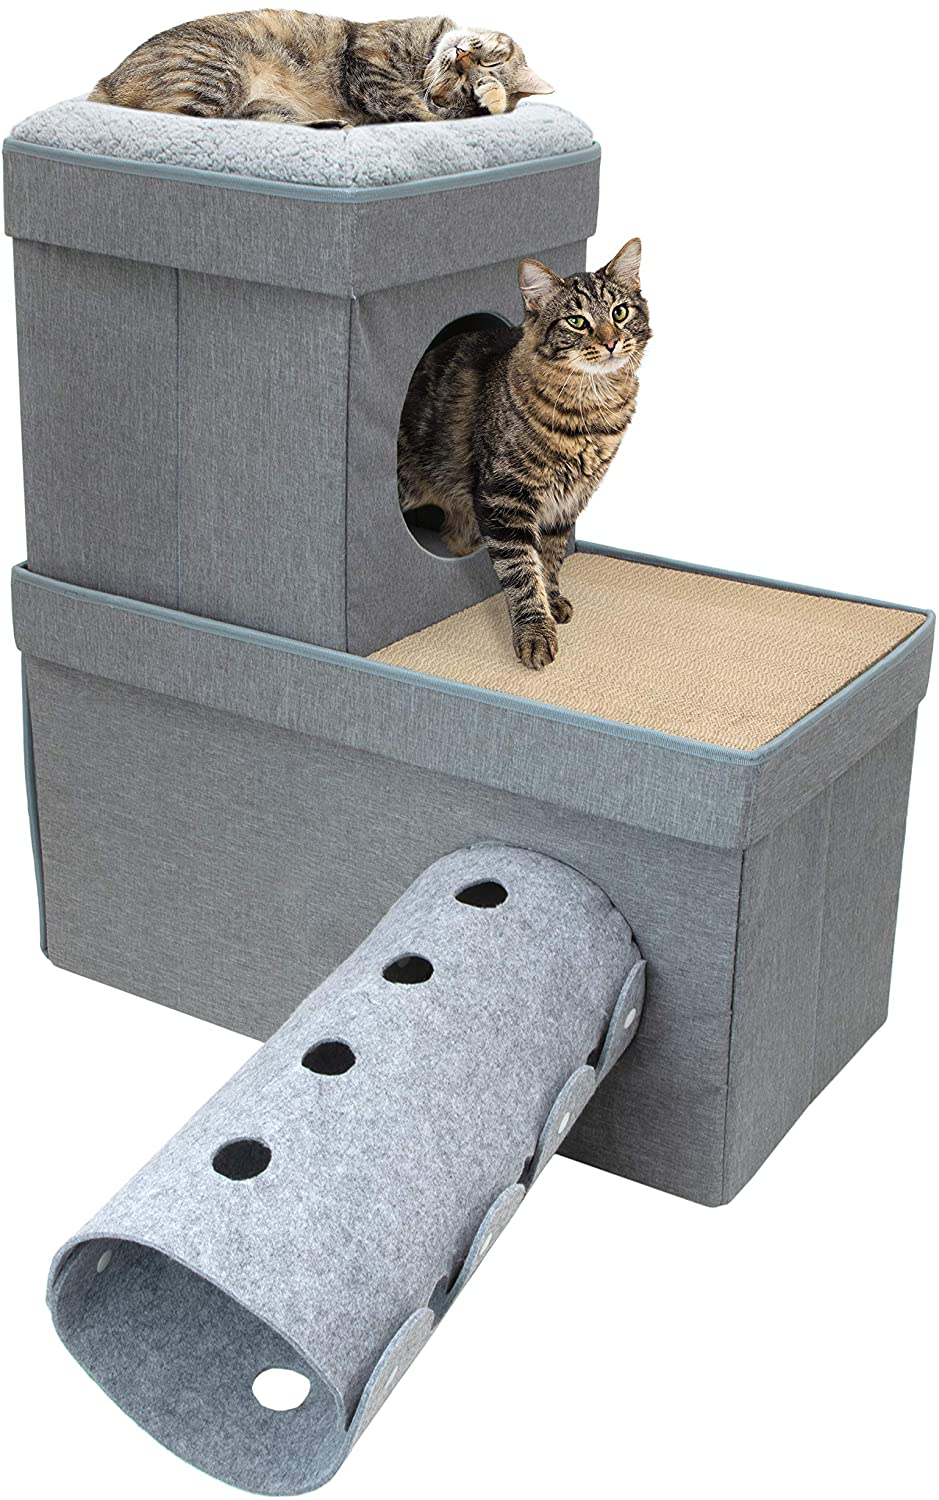 Kitty City Large Stackable Tan Cat Condo, Cat Cube, Cat House, Pop